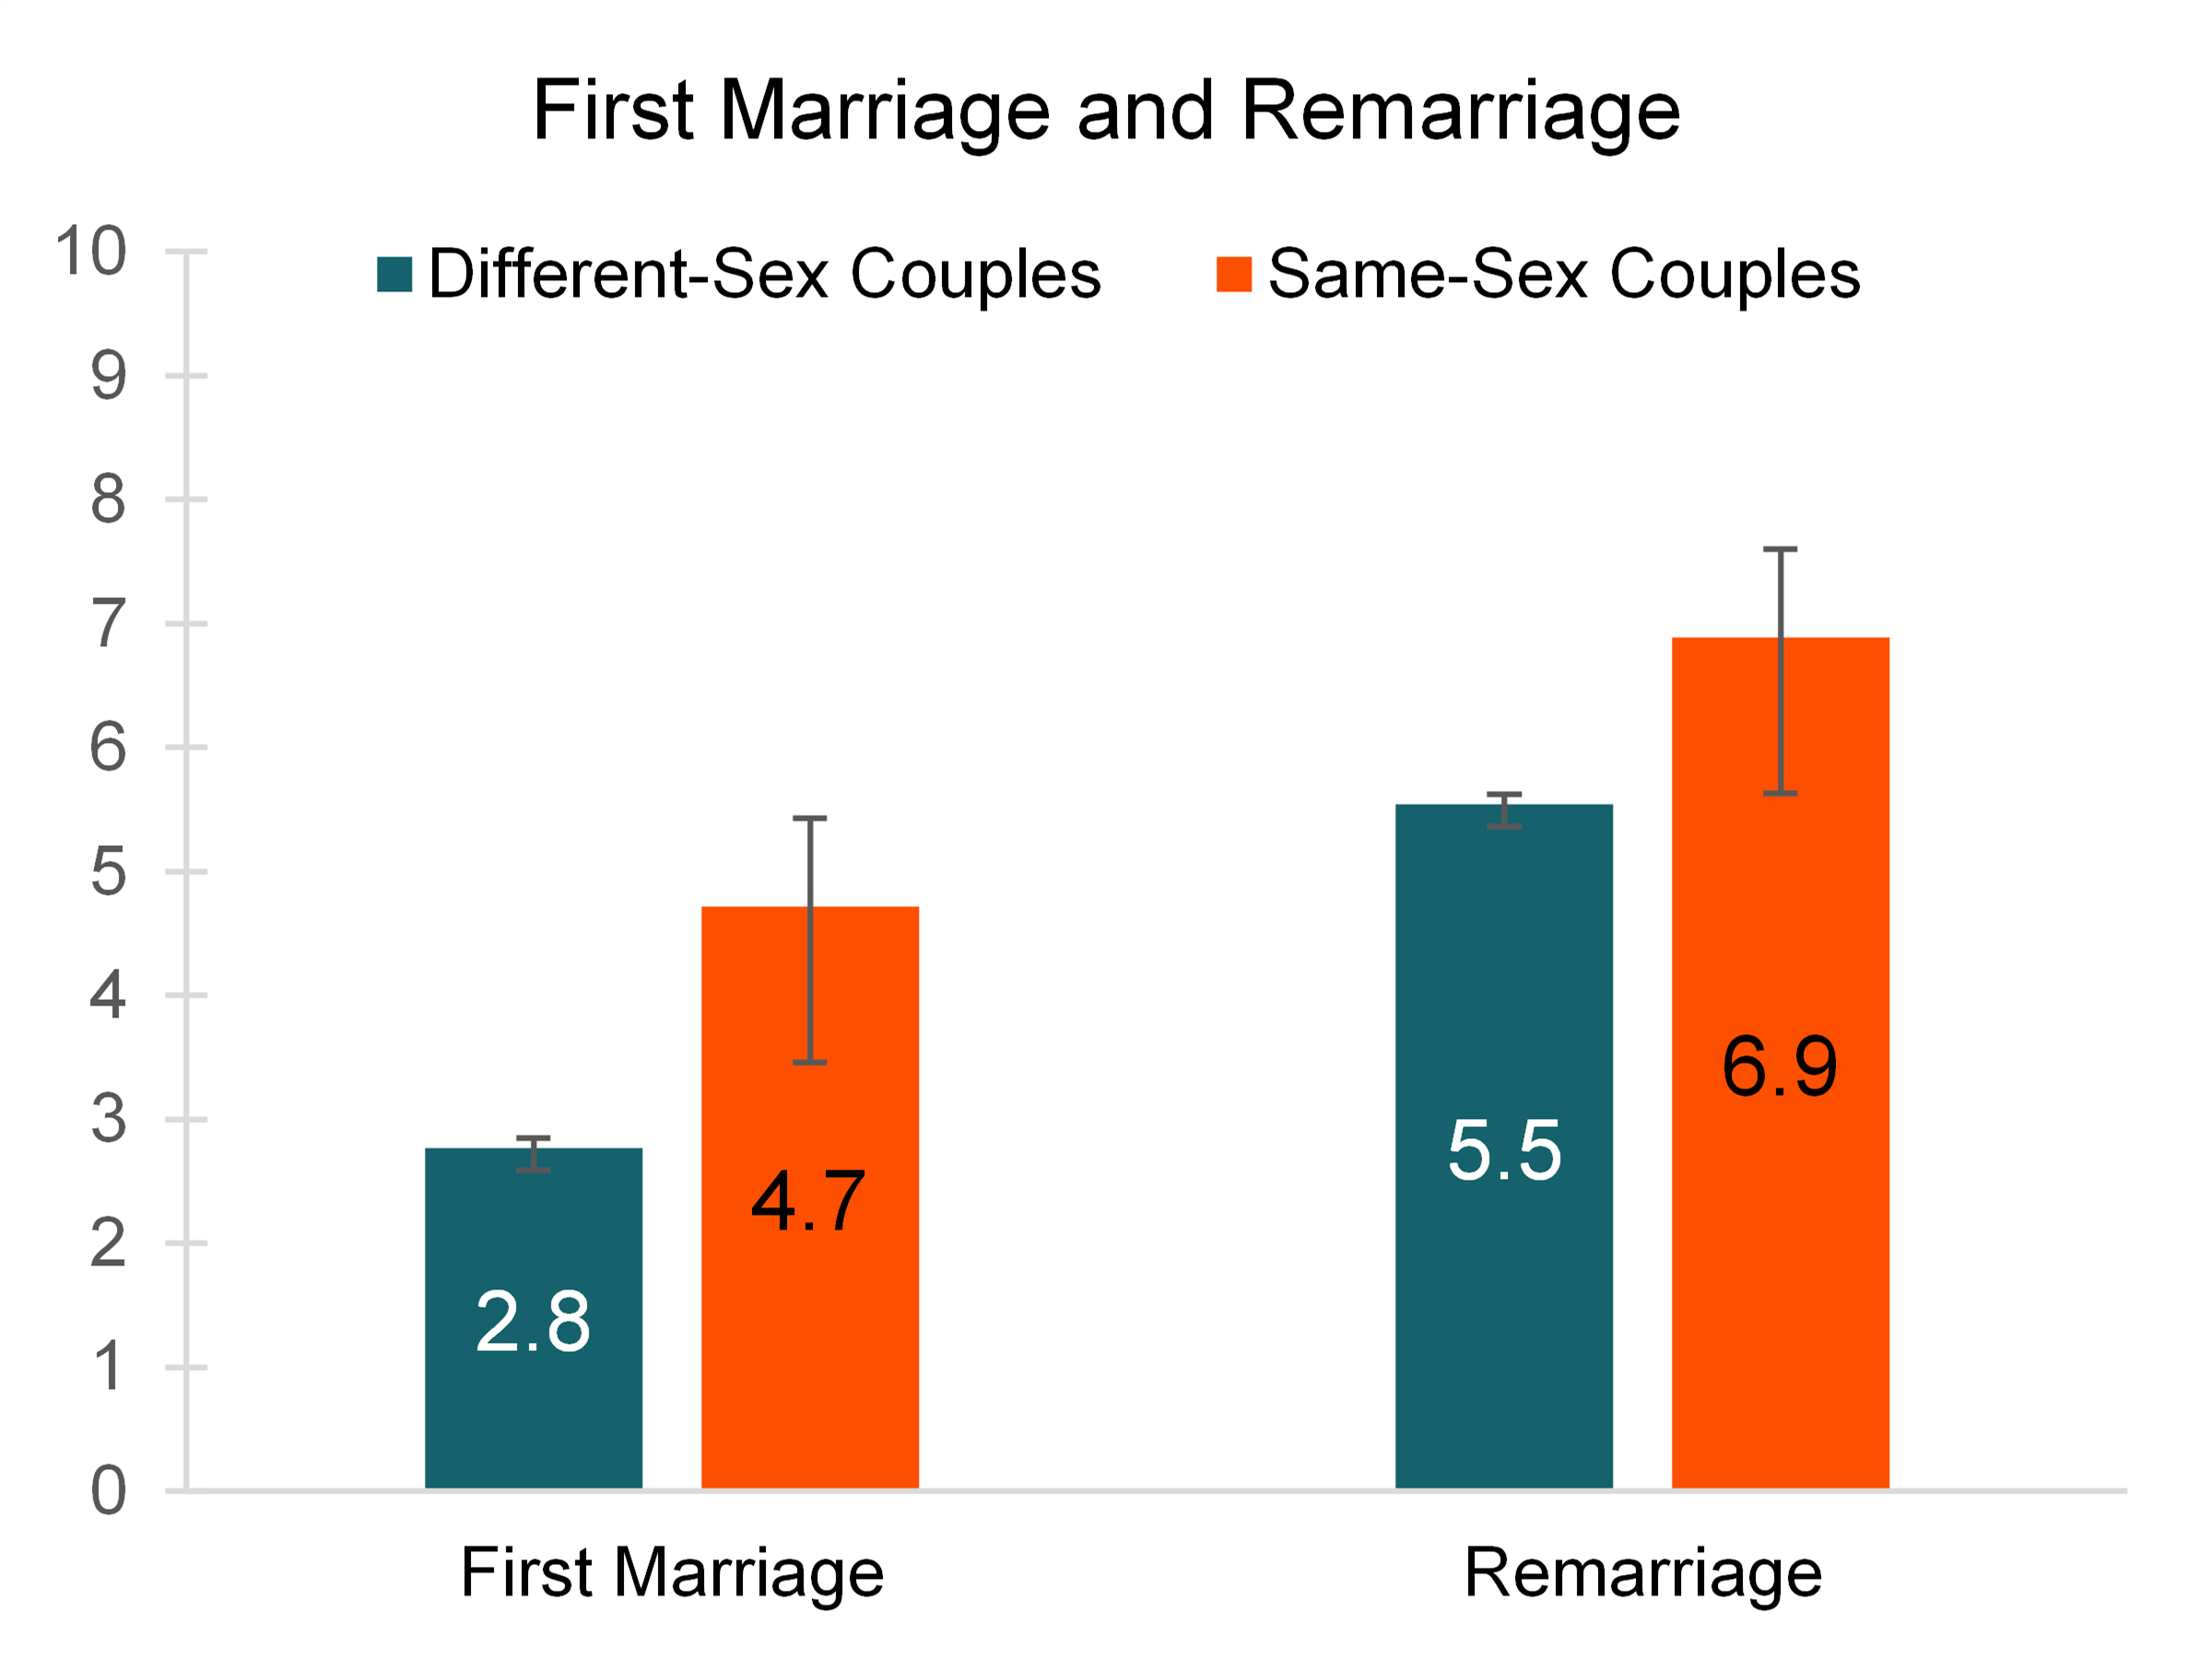 Graph showing Figure 4. Mean Age Difference & Marital History for Same-Sex and Different-Sex Couples Married in the Last Year, 2022